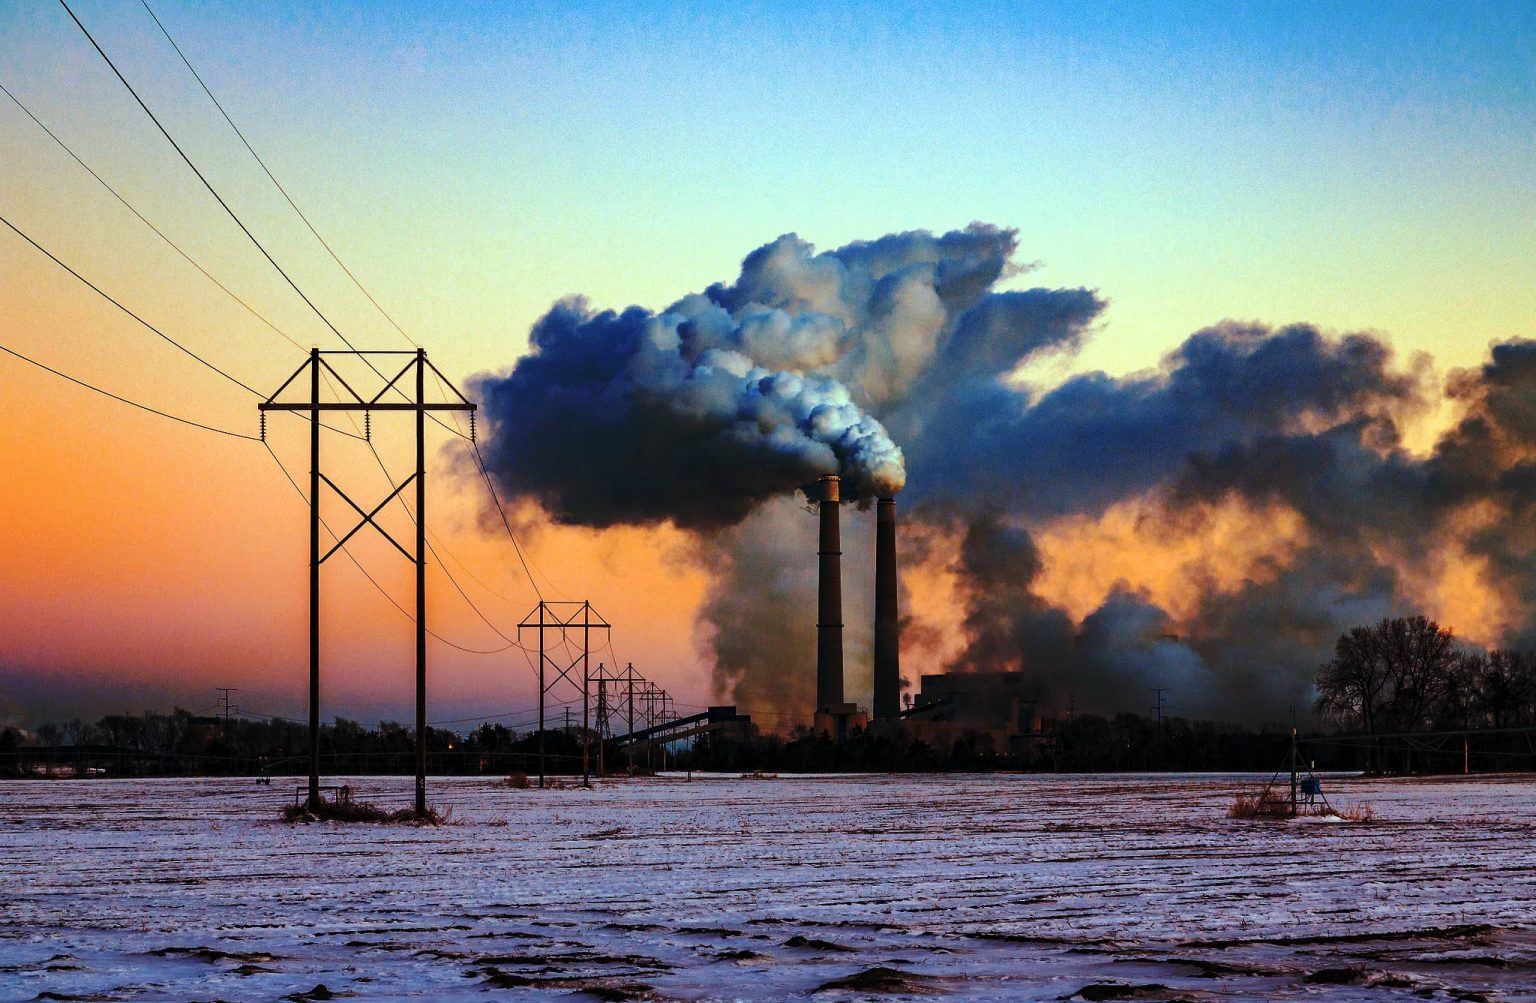 Sherco Generating Station in Becker, Minnesota, is a coal-fired power plant that consumes 20,000 to 30,000 tons of coal every day.